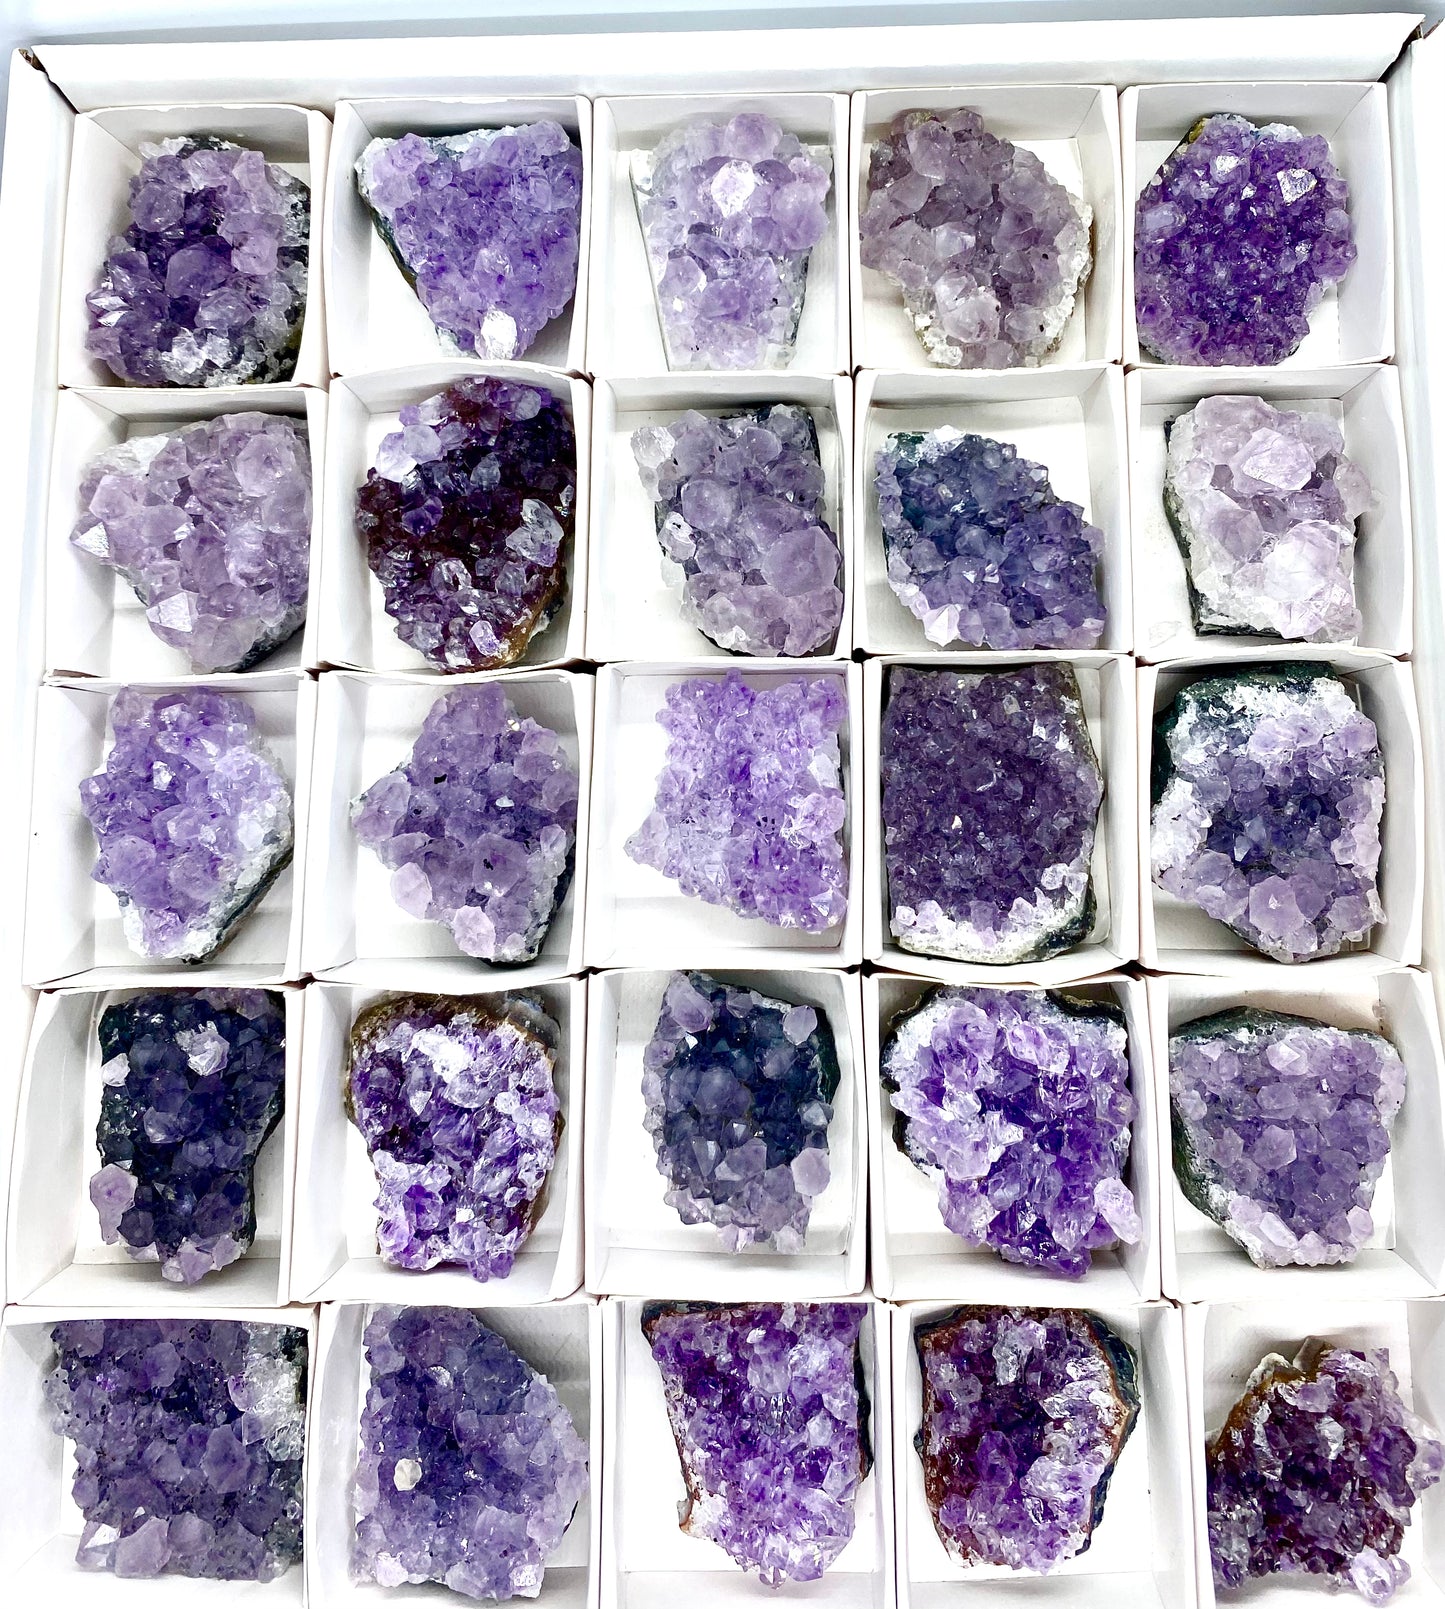 Small amethyst cluster